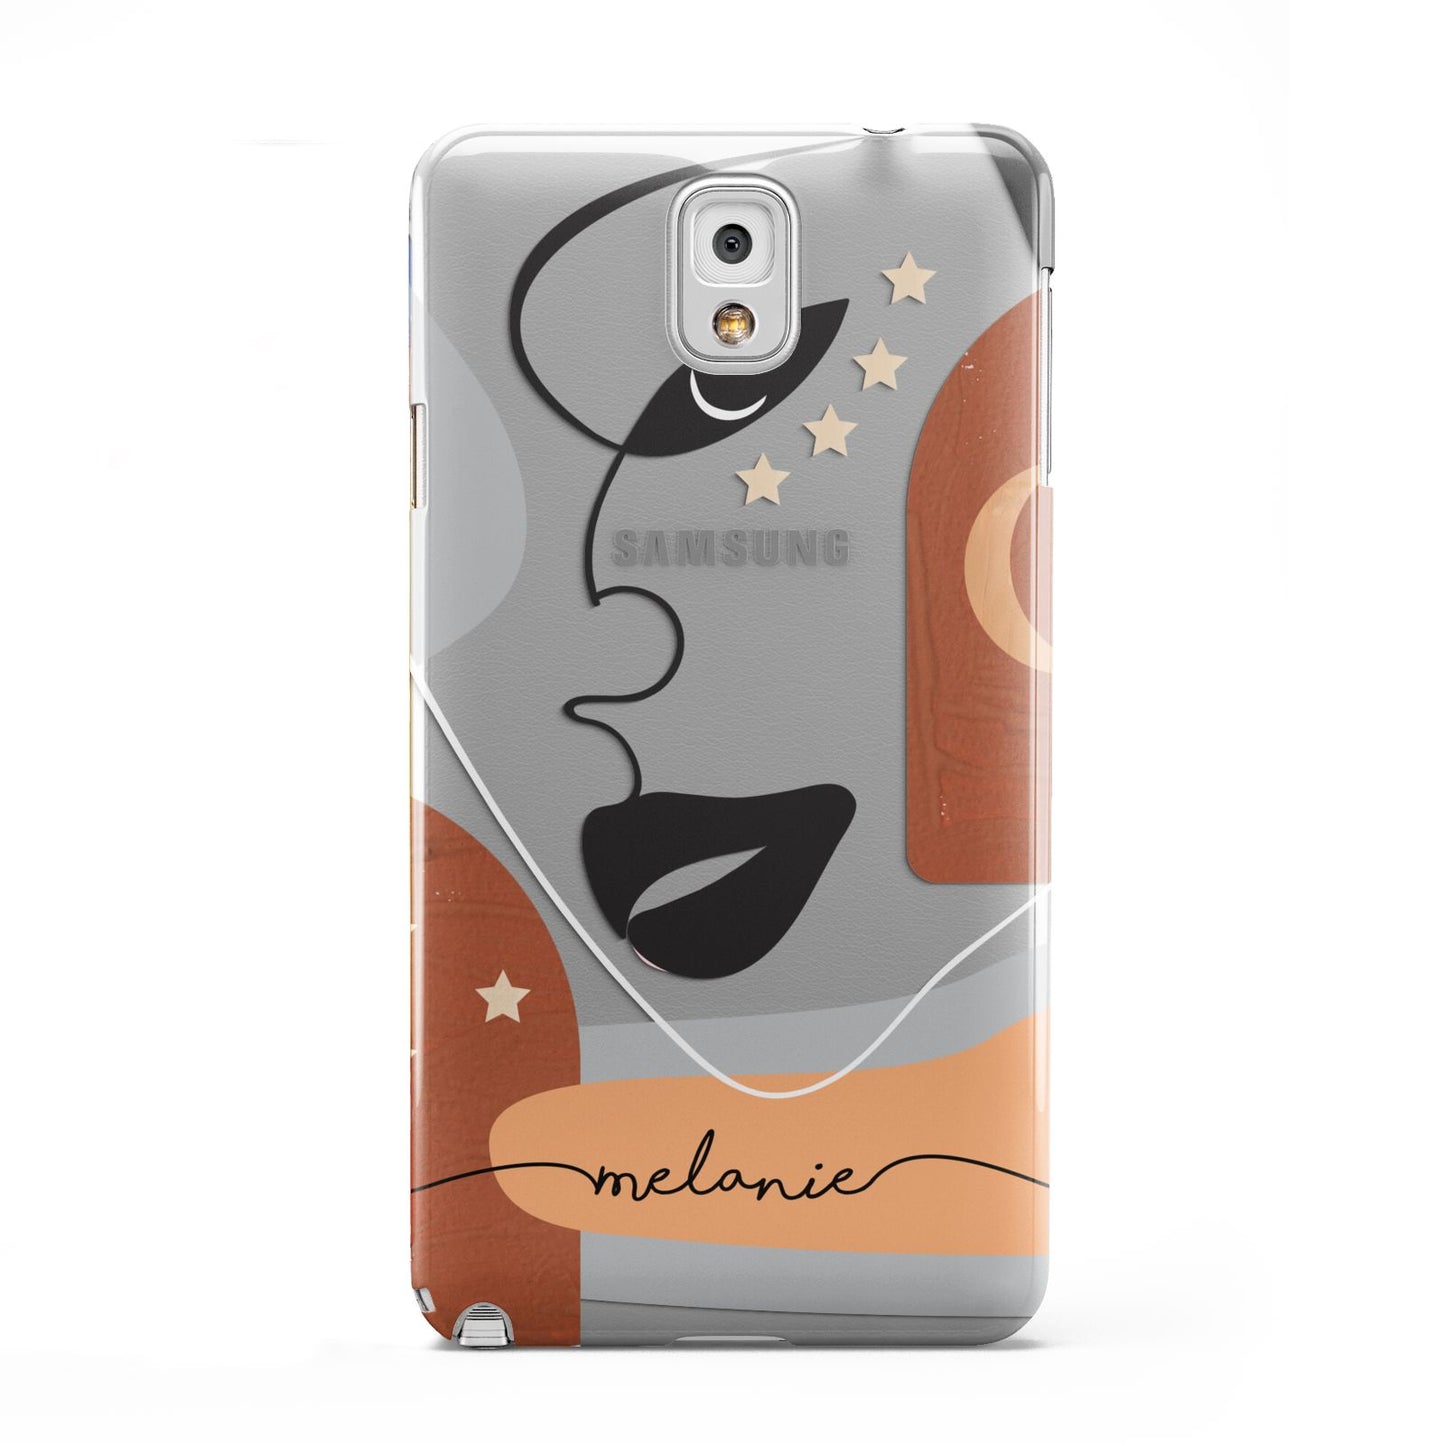 Personalised Line Art Samsung Galaxy Note 3 Case